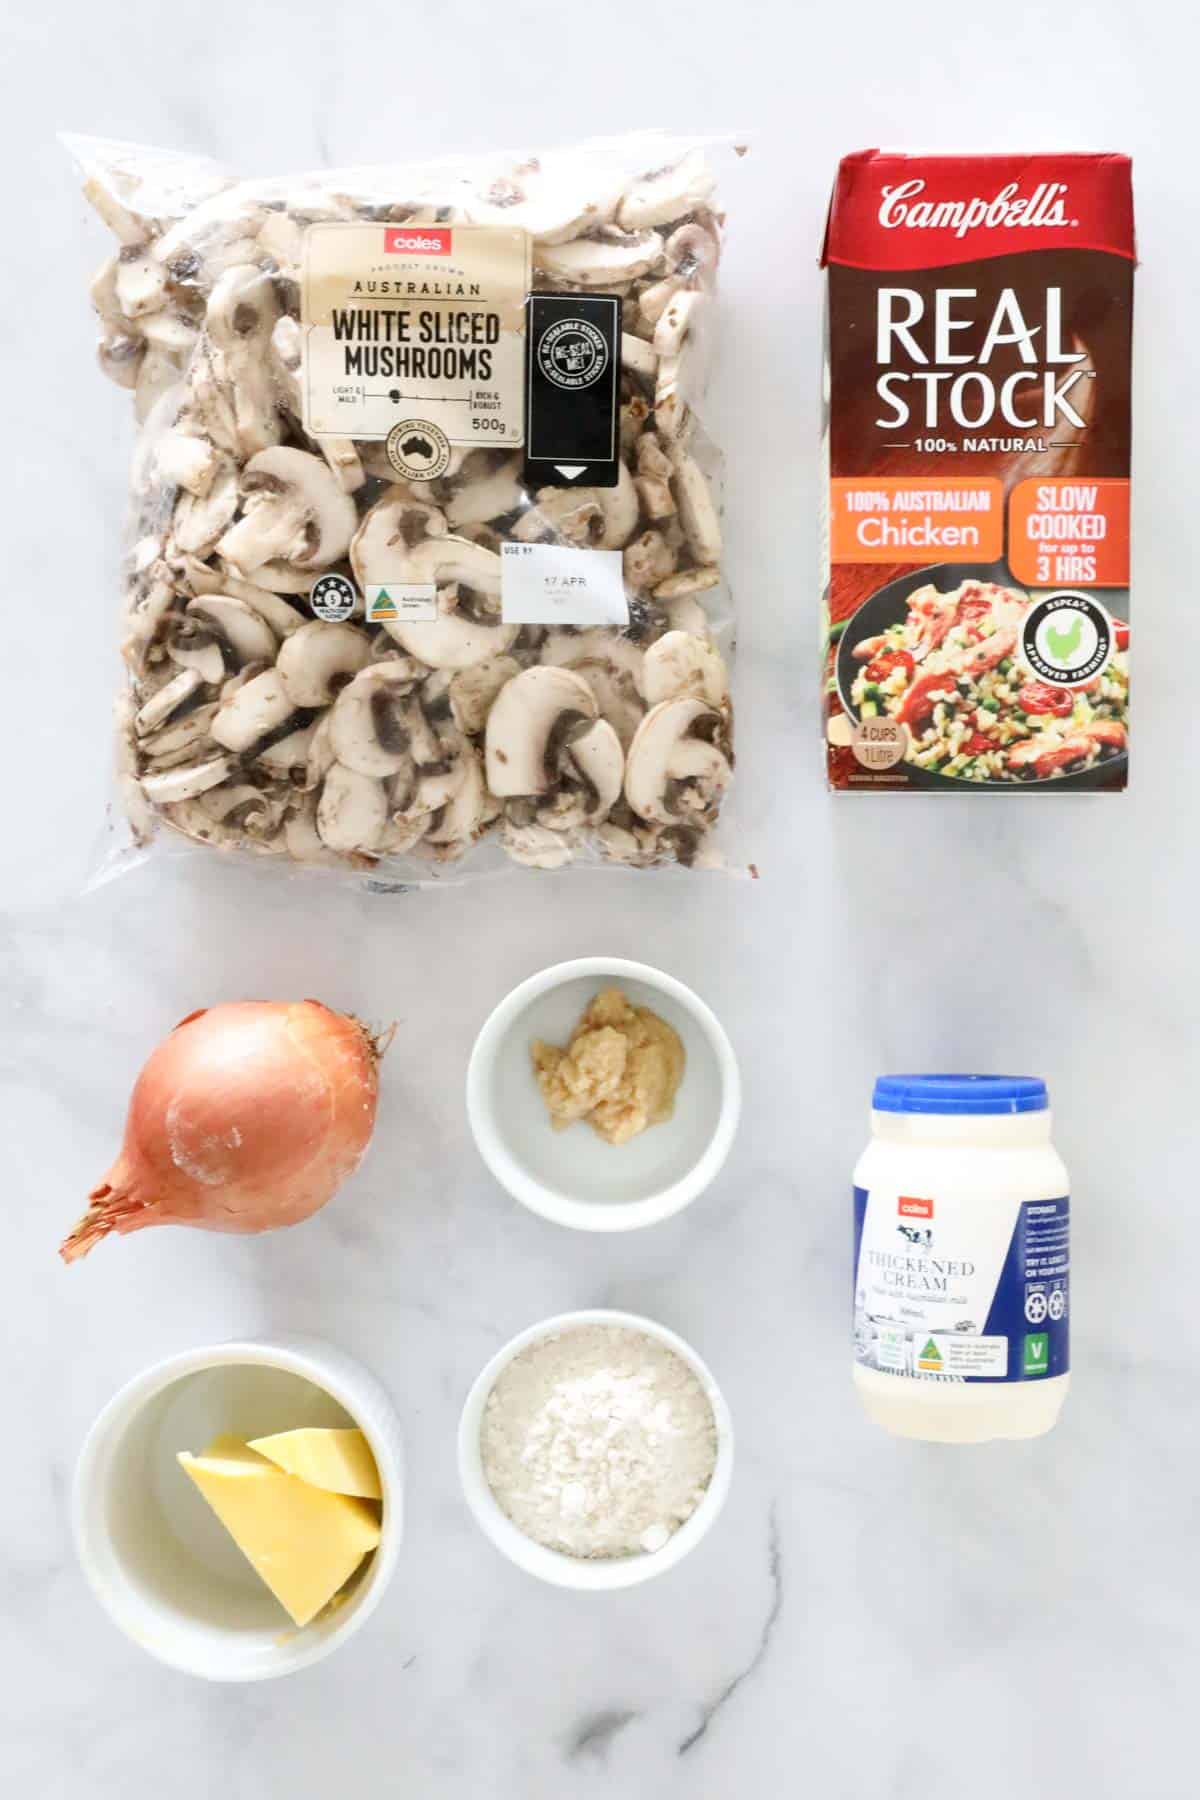 The ingredients for a creamy mushroom soup.